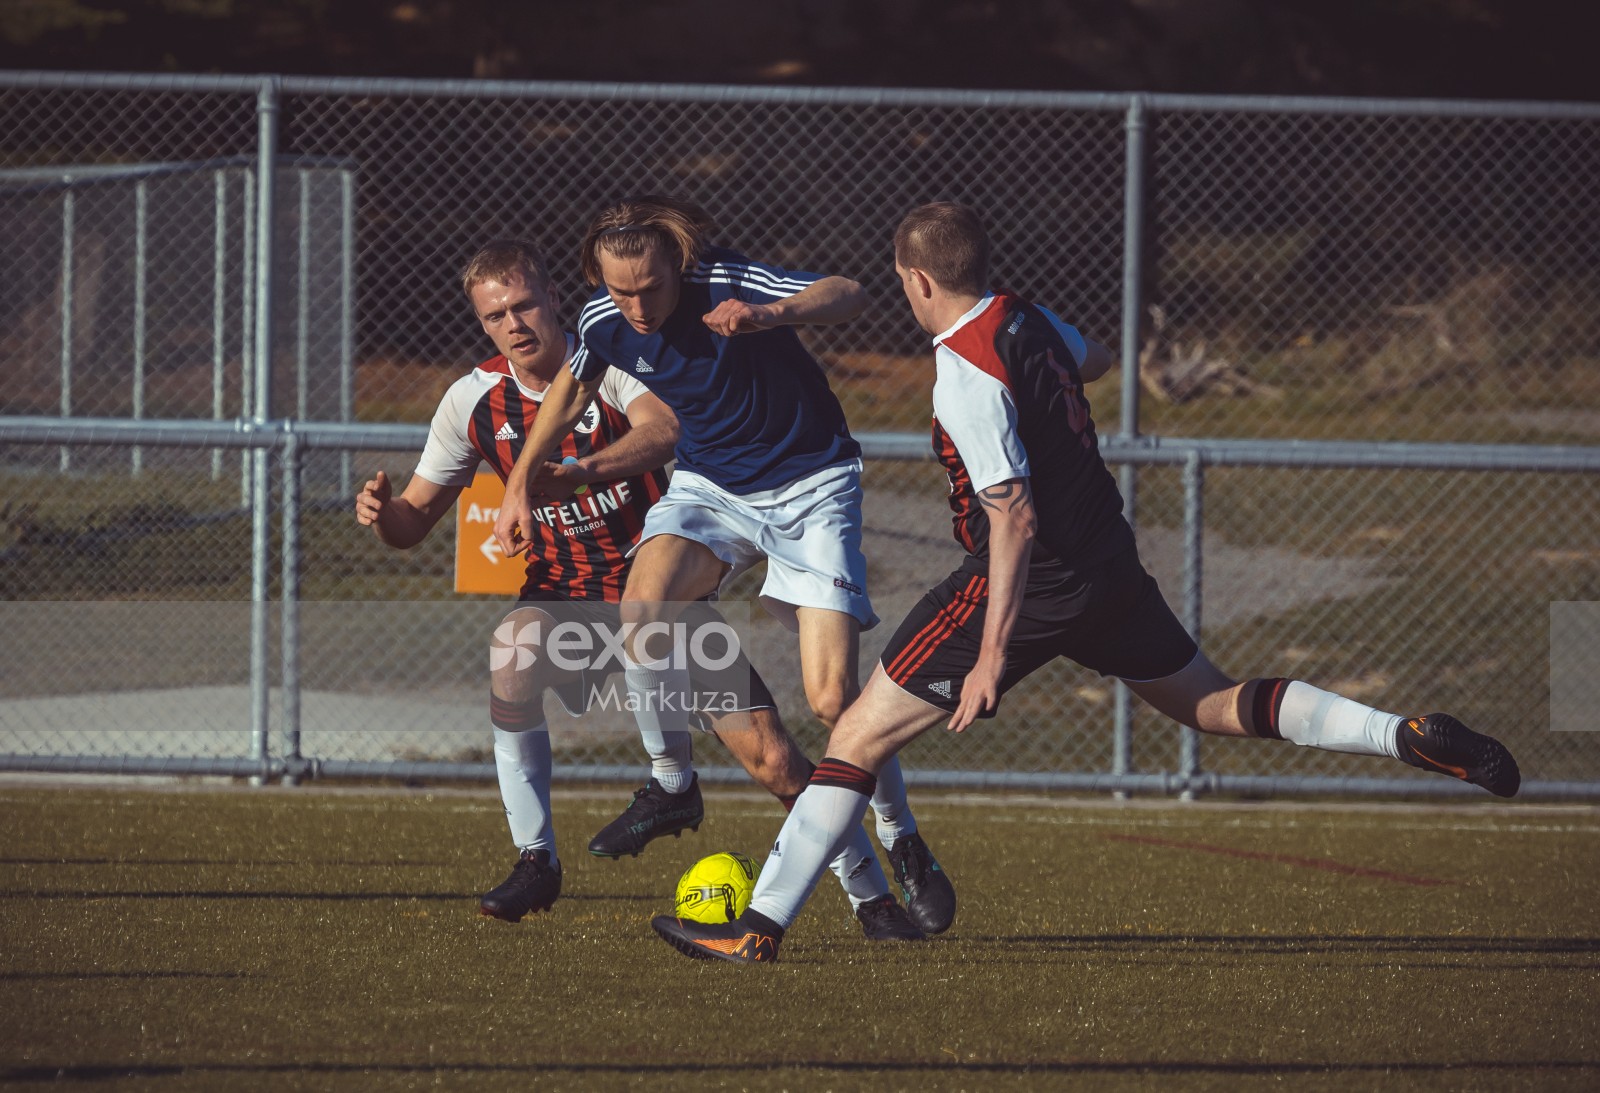 Football player wearing Nike hairband try to steer clear of a tackle - Sports Zone sunday league